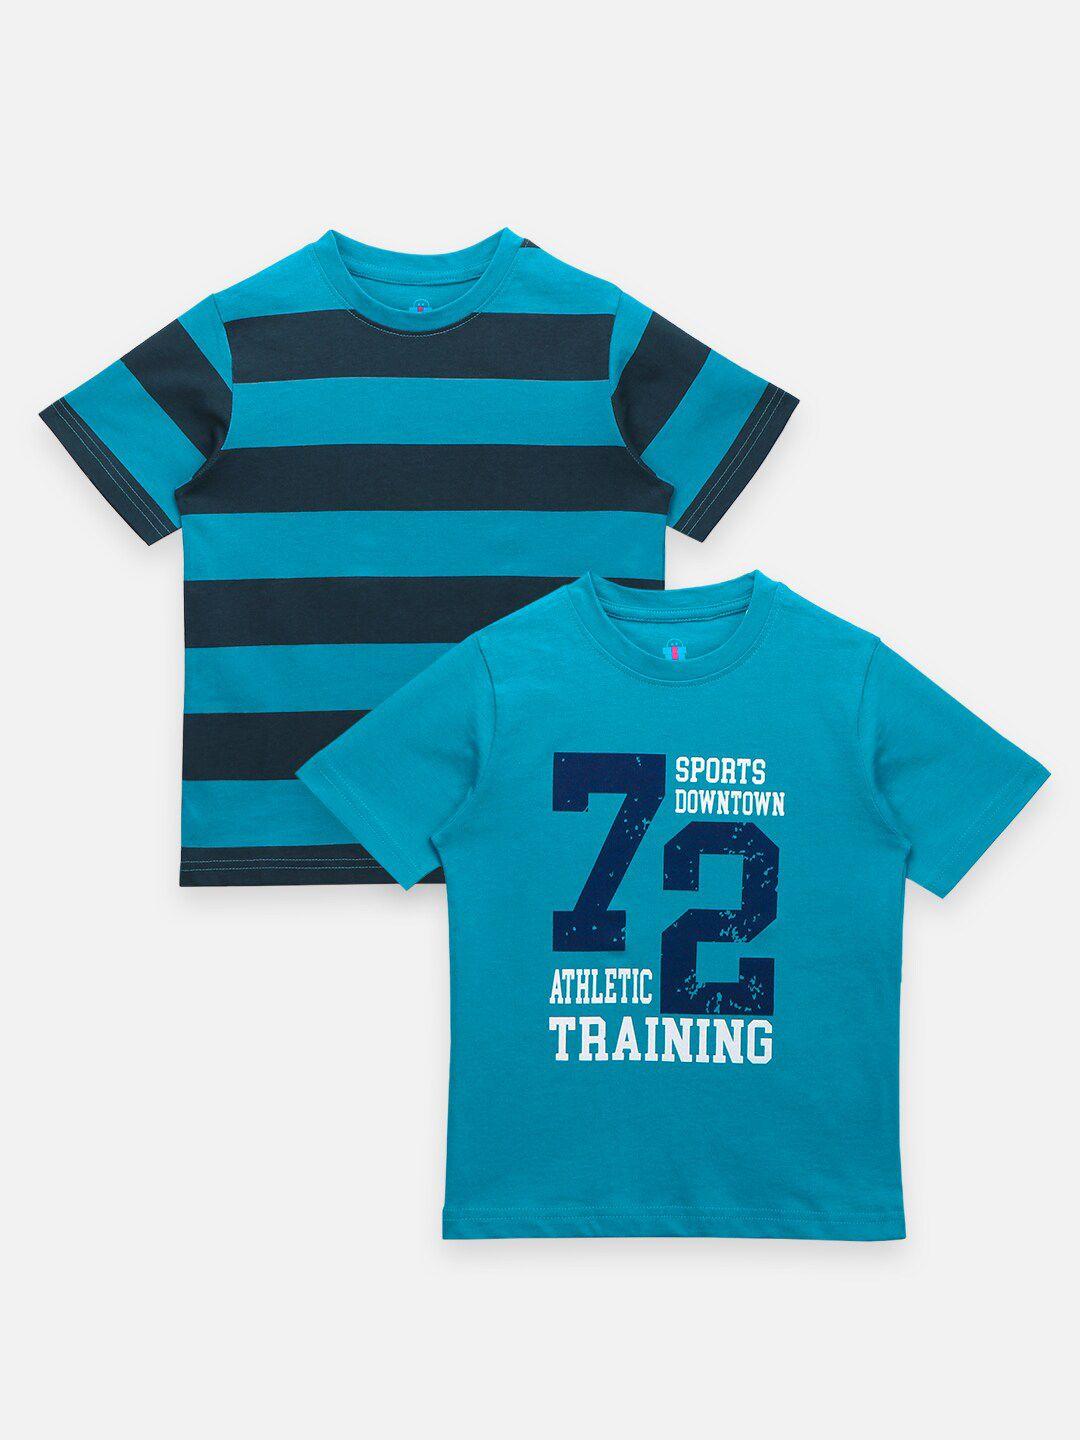 lilpicks-boys-teal-blue-set-of-2-typography-printed-outdoor-cotton-t-shirt